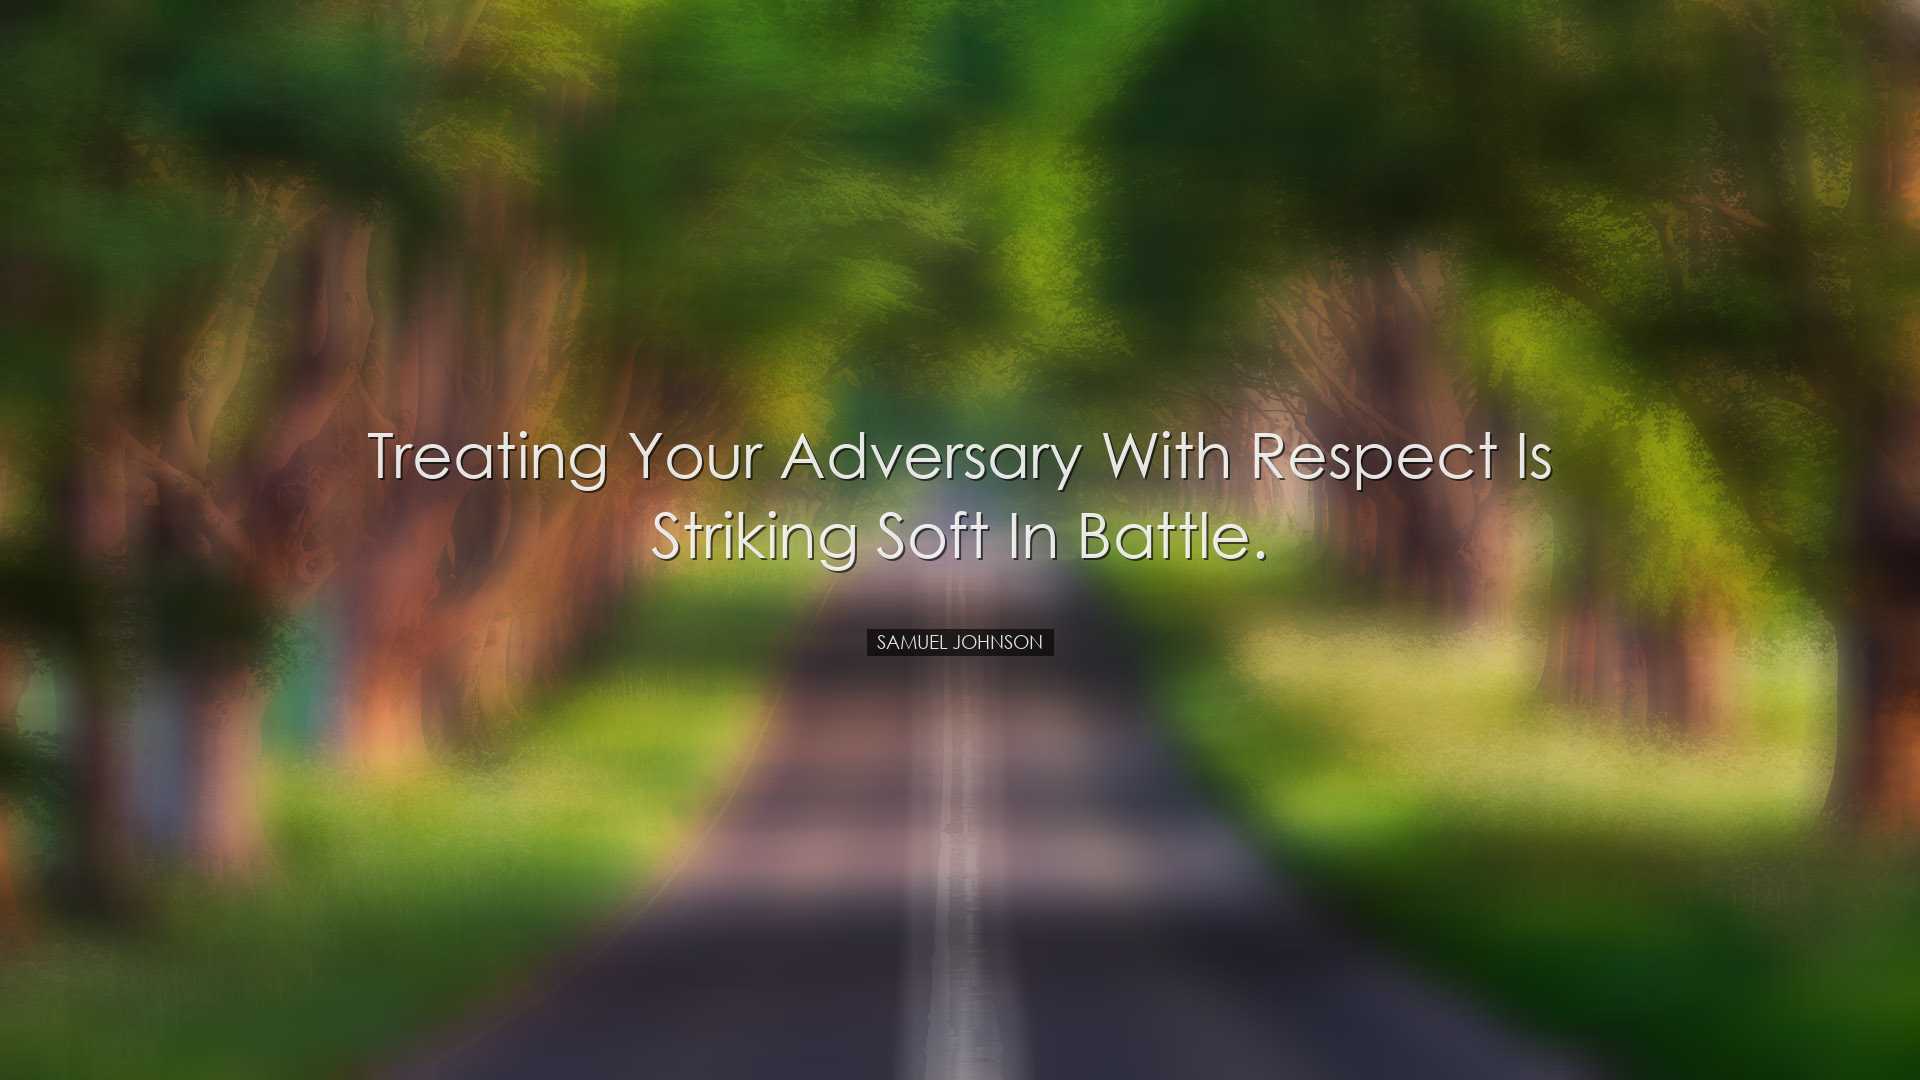 Treating your adversary with respect is striking soft in battle. -